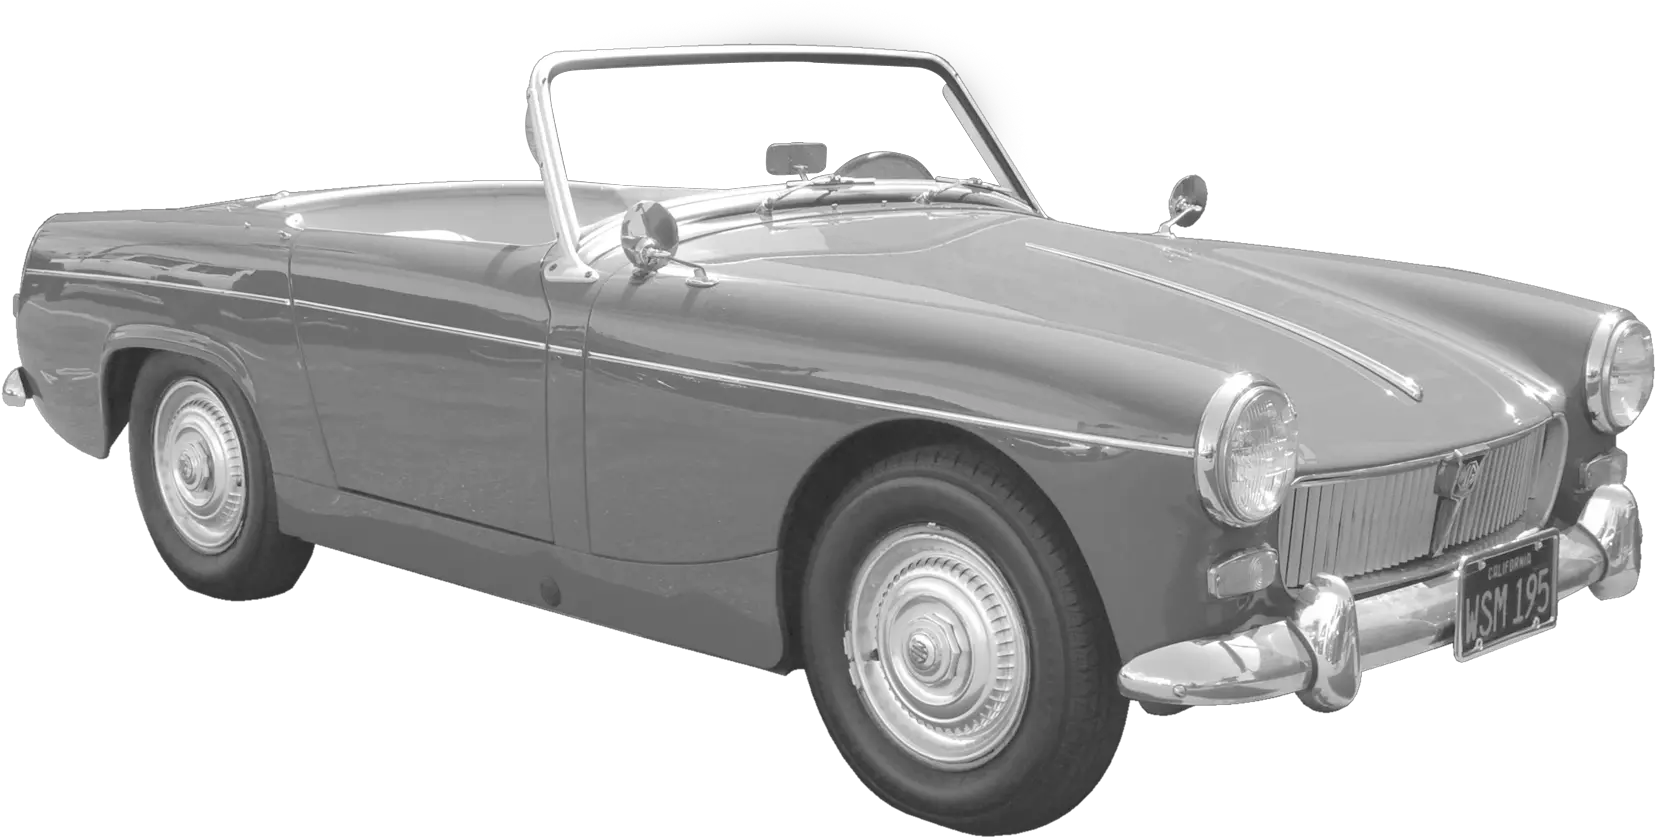 Download 1962 Mg Midget Classic Cars In Png Full Size Austin A40 Sports Classic Cars Png